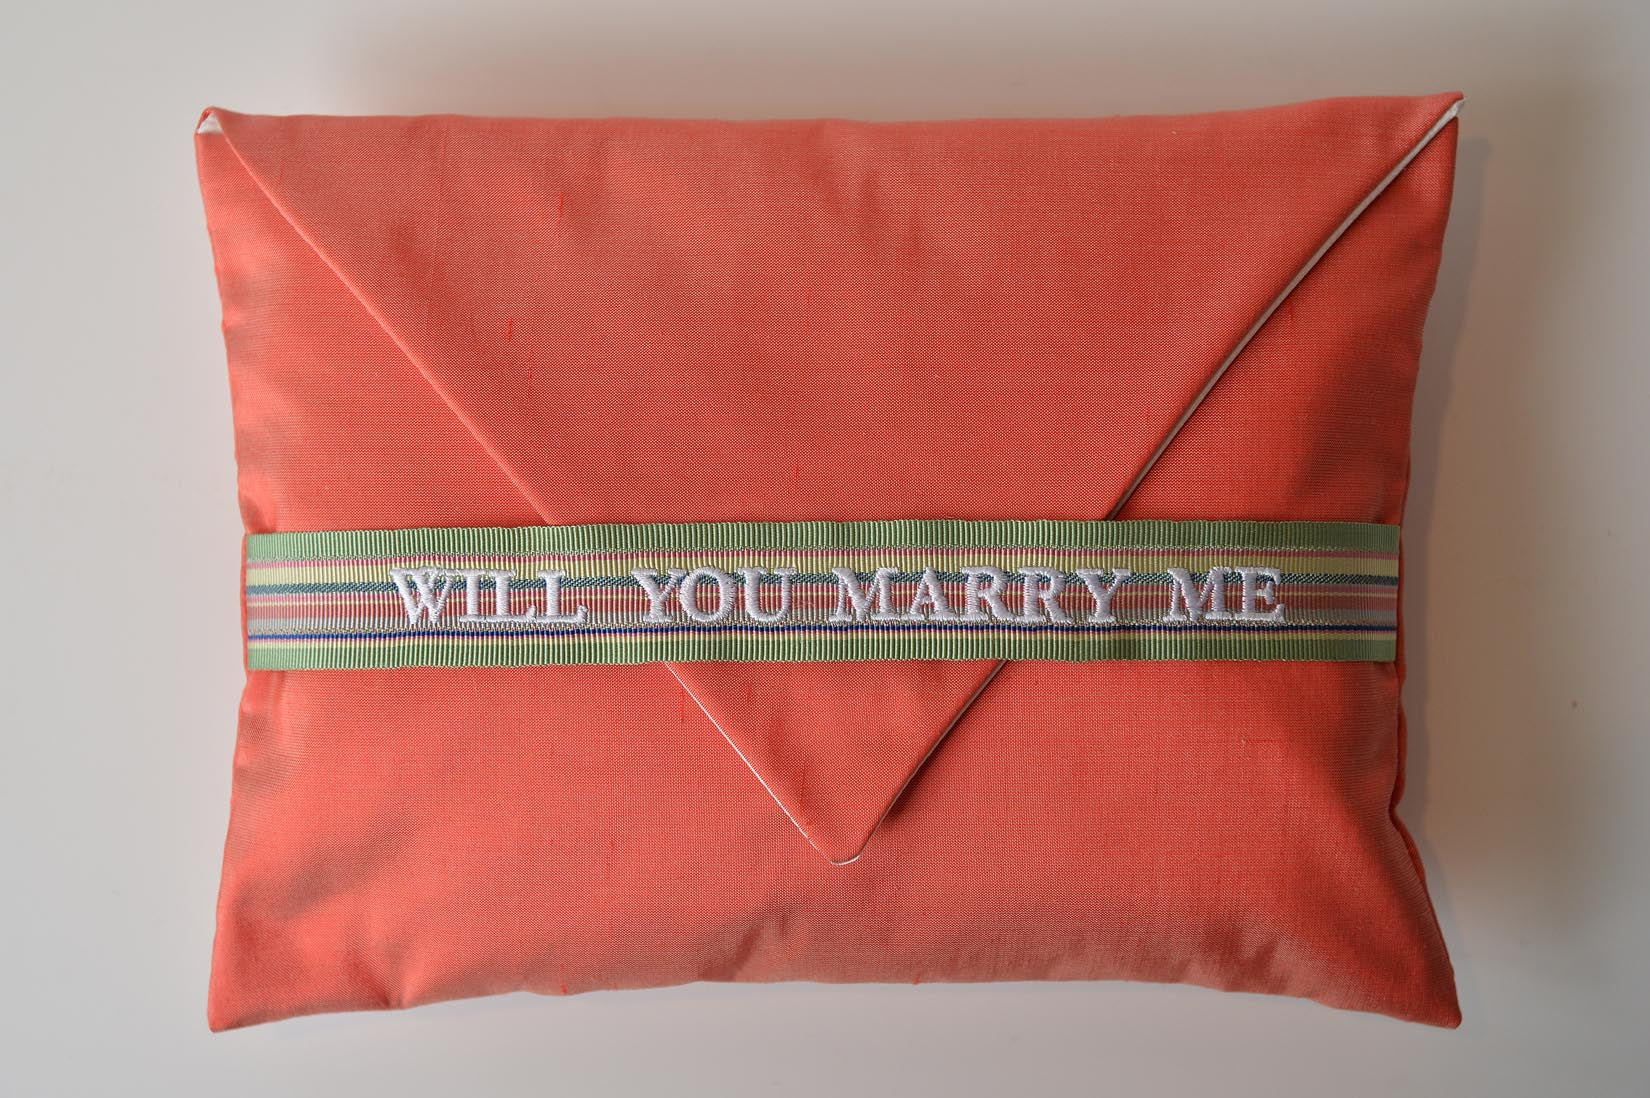 Will you marry me Rouge silk envelope cushion - MyBilletDoux.com